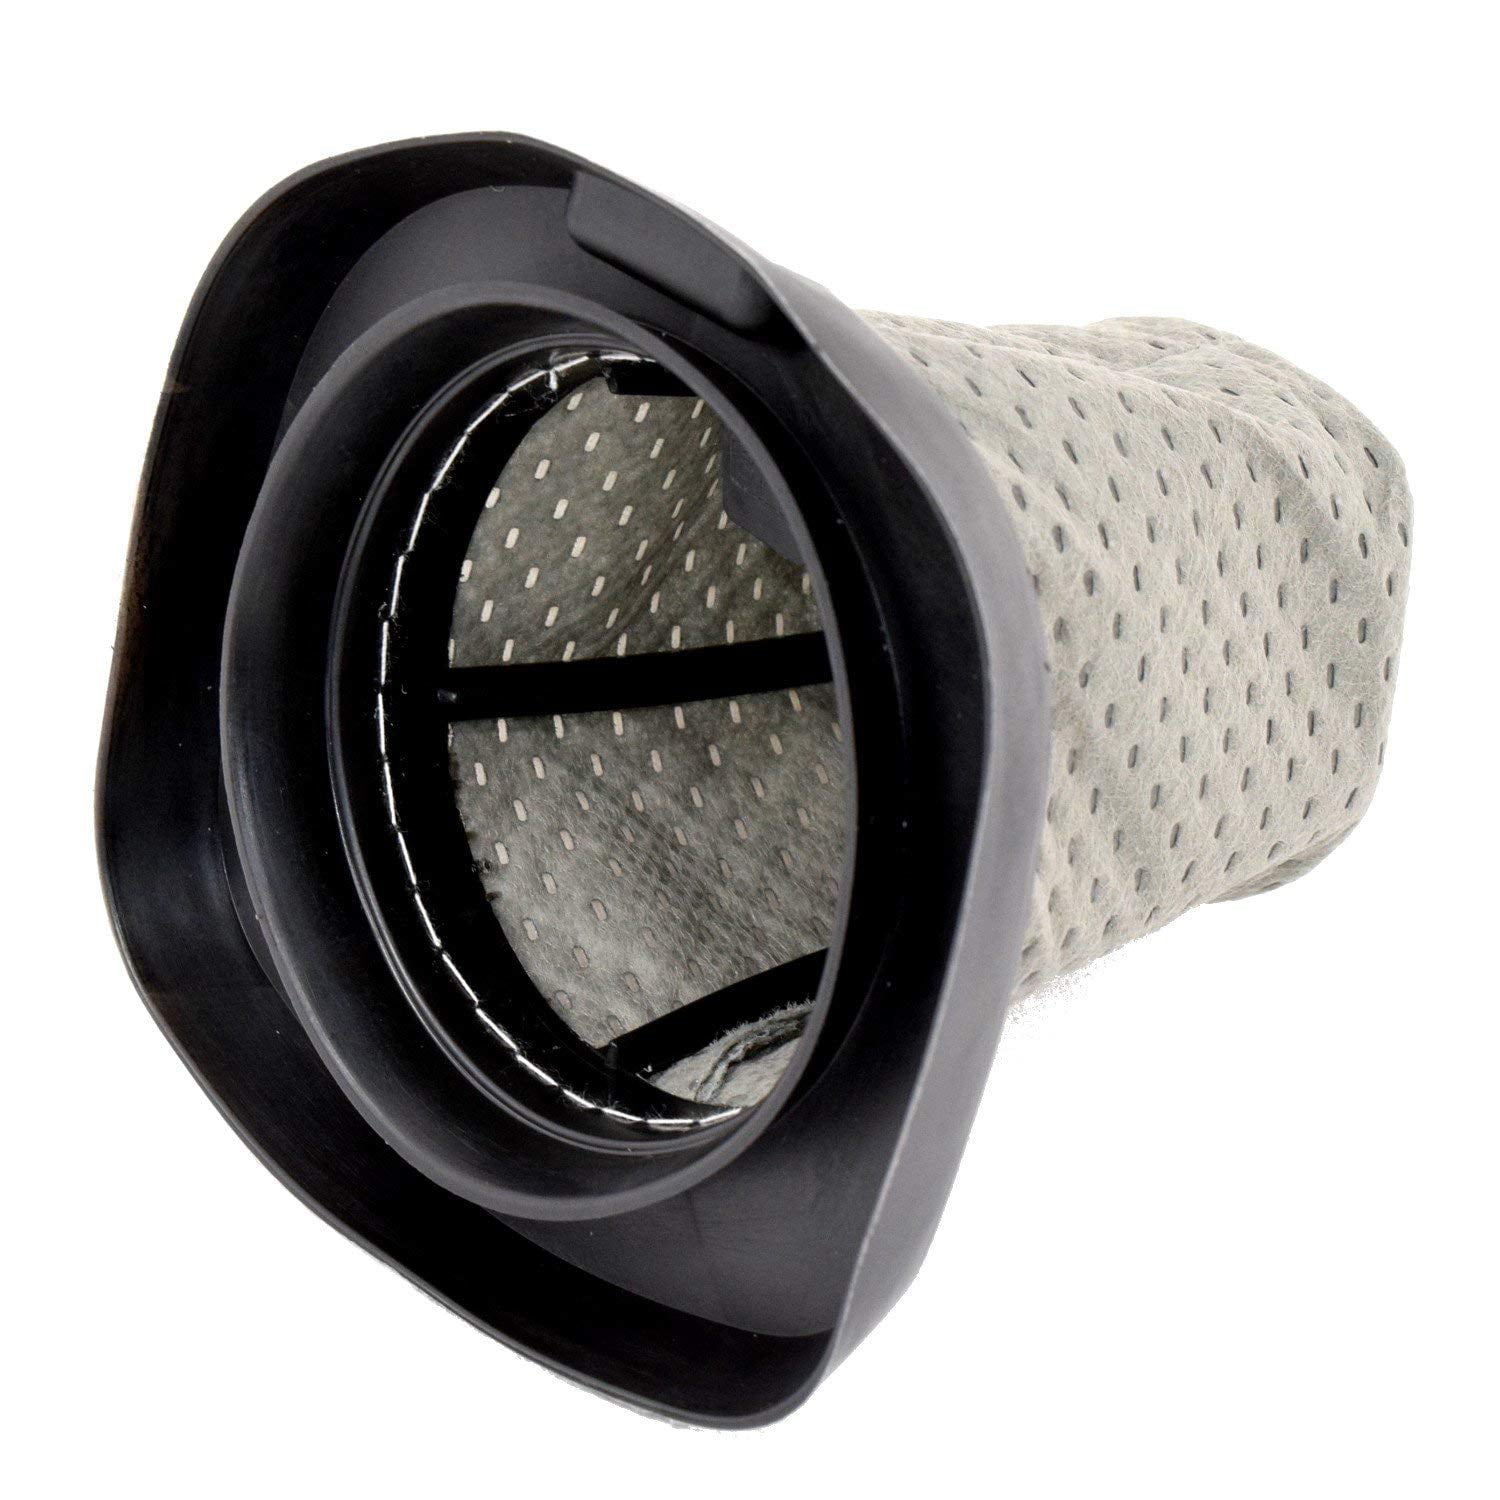 HQRP Dust Cup Filter for Dirt Devil Versa Power Series Stick Vac Vacuum Cleaners 